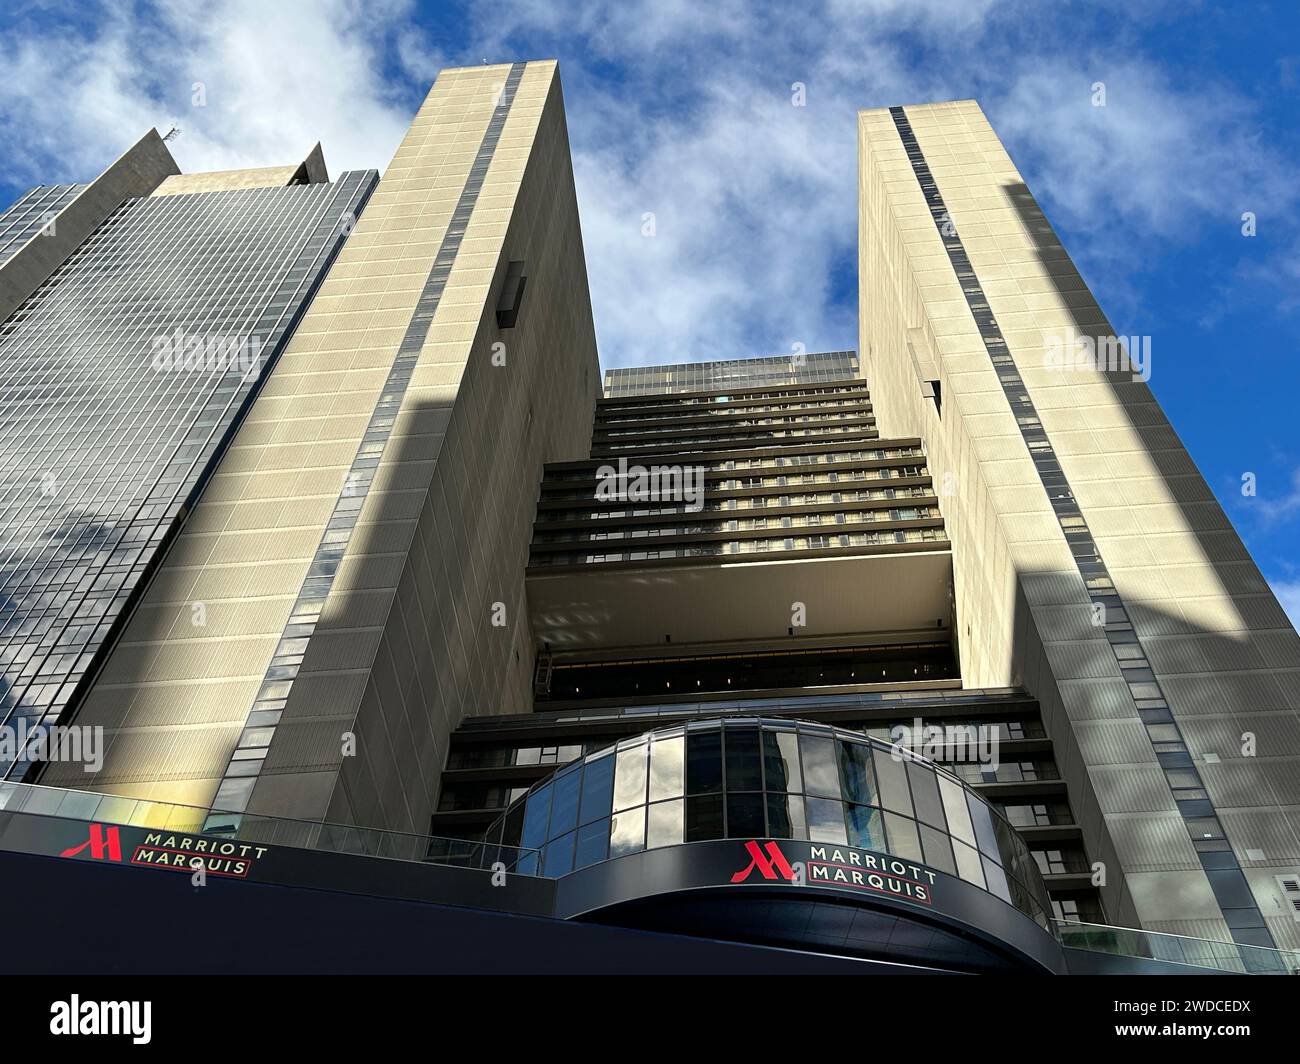 Low angle view of Marriot Marquis Hotel, Times Square, New York City, New York, USA Stock Photo